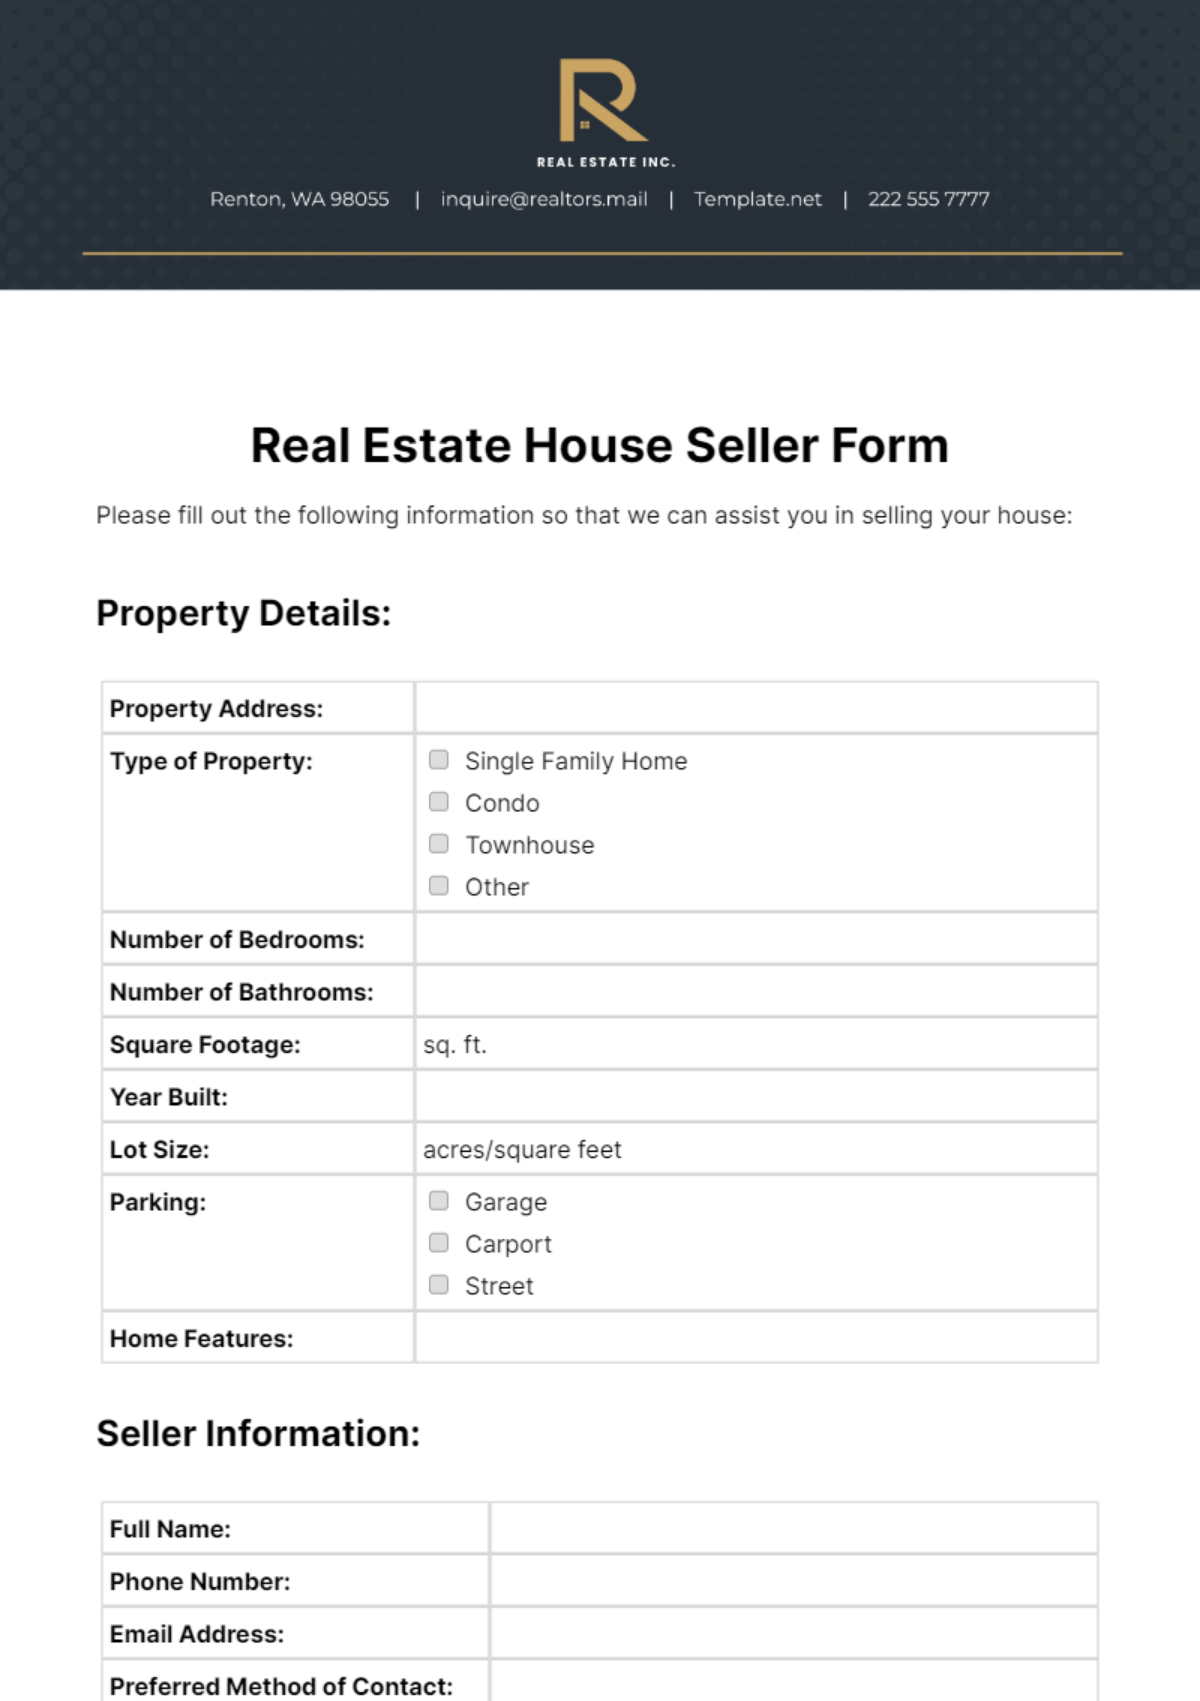 Real Estate House Seller Form Template